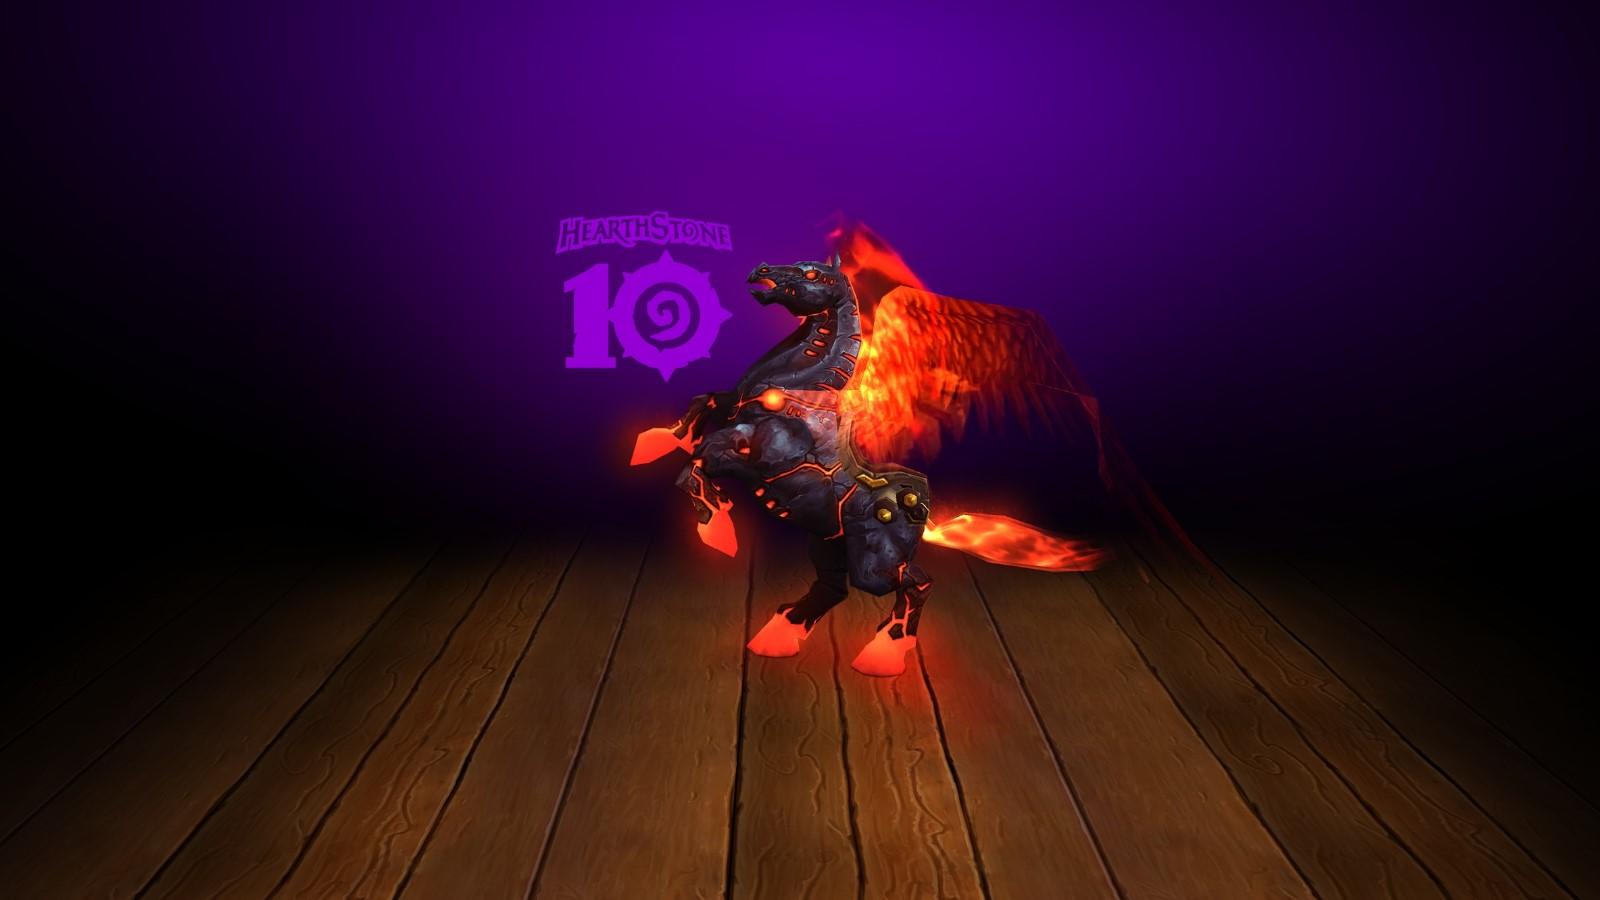 The Fiery Hearthsteed mount for WoW and the 10th anniversary of Hearthstone